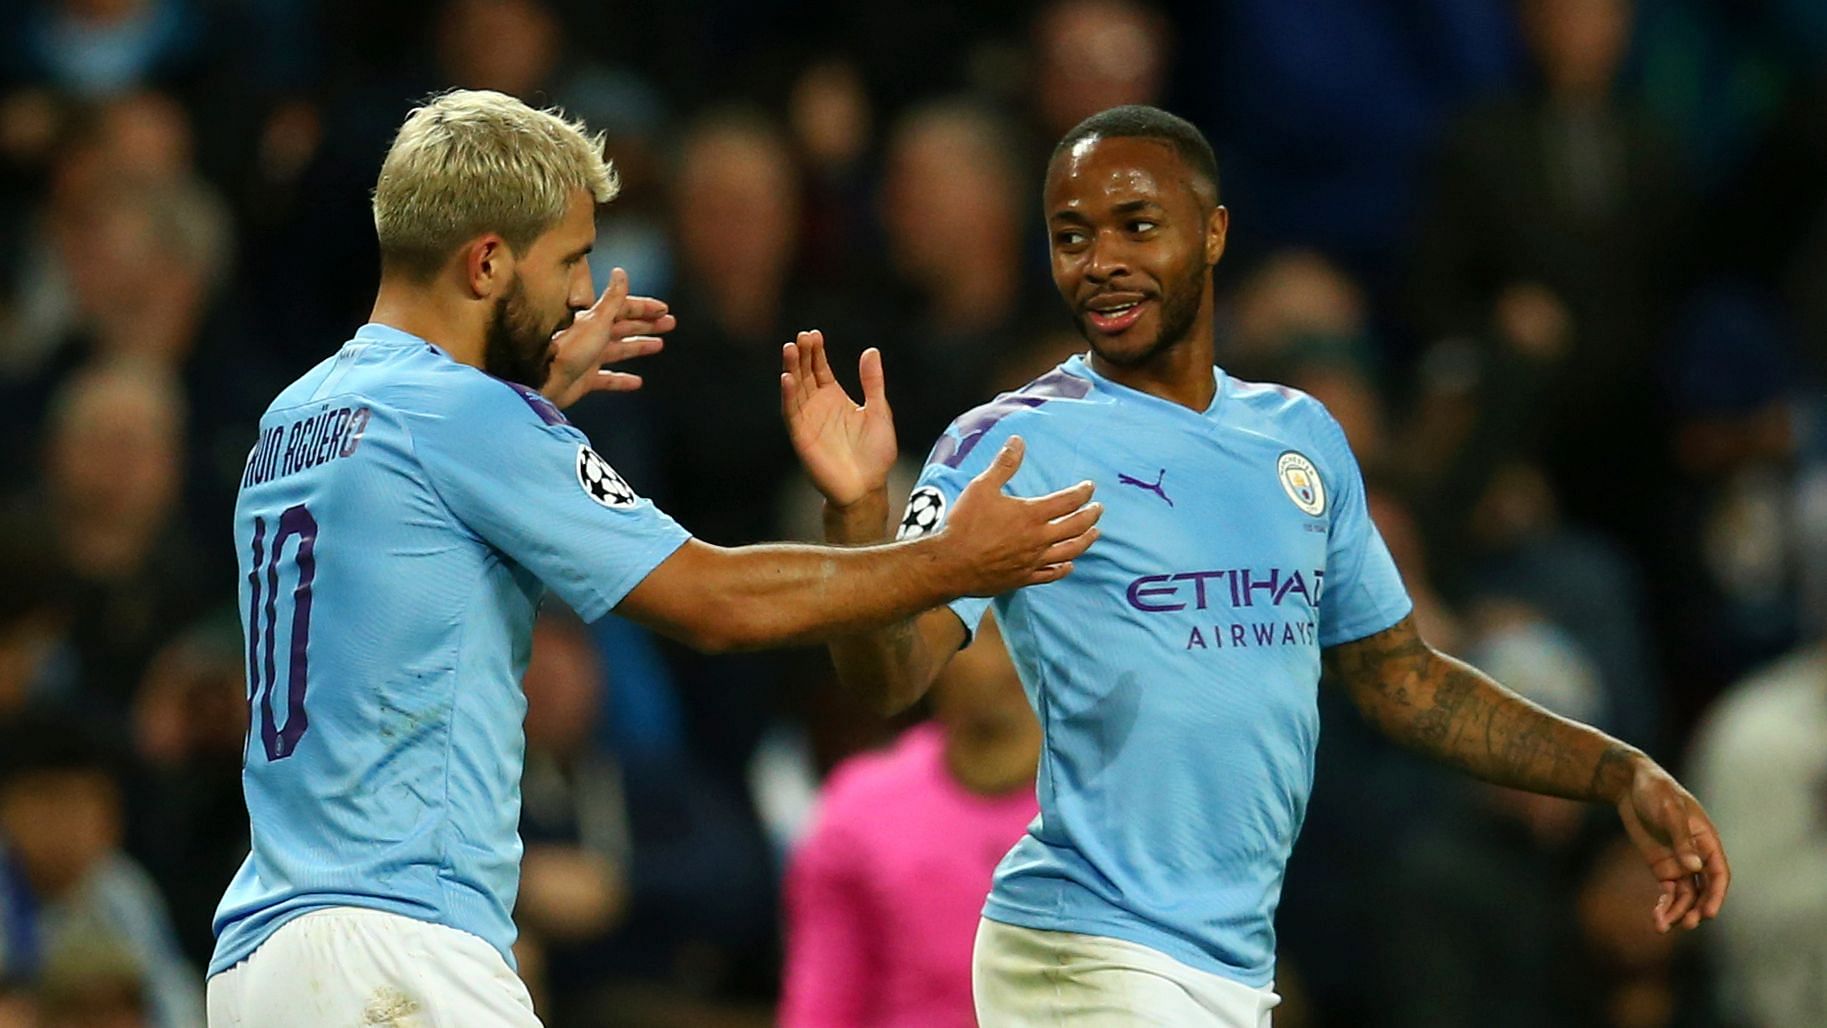 Manchester City’s Raheem Sterling, left, celebrates with his teammate Sergio Aguero after scoring his side’s fifth goal, during the group C Champions League soccer match between Manchester City and Atalanta at the Etihad Stadium in Manchester.